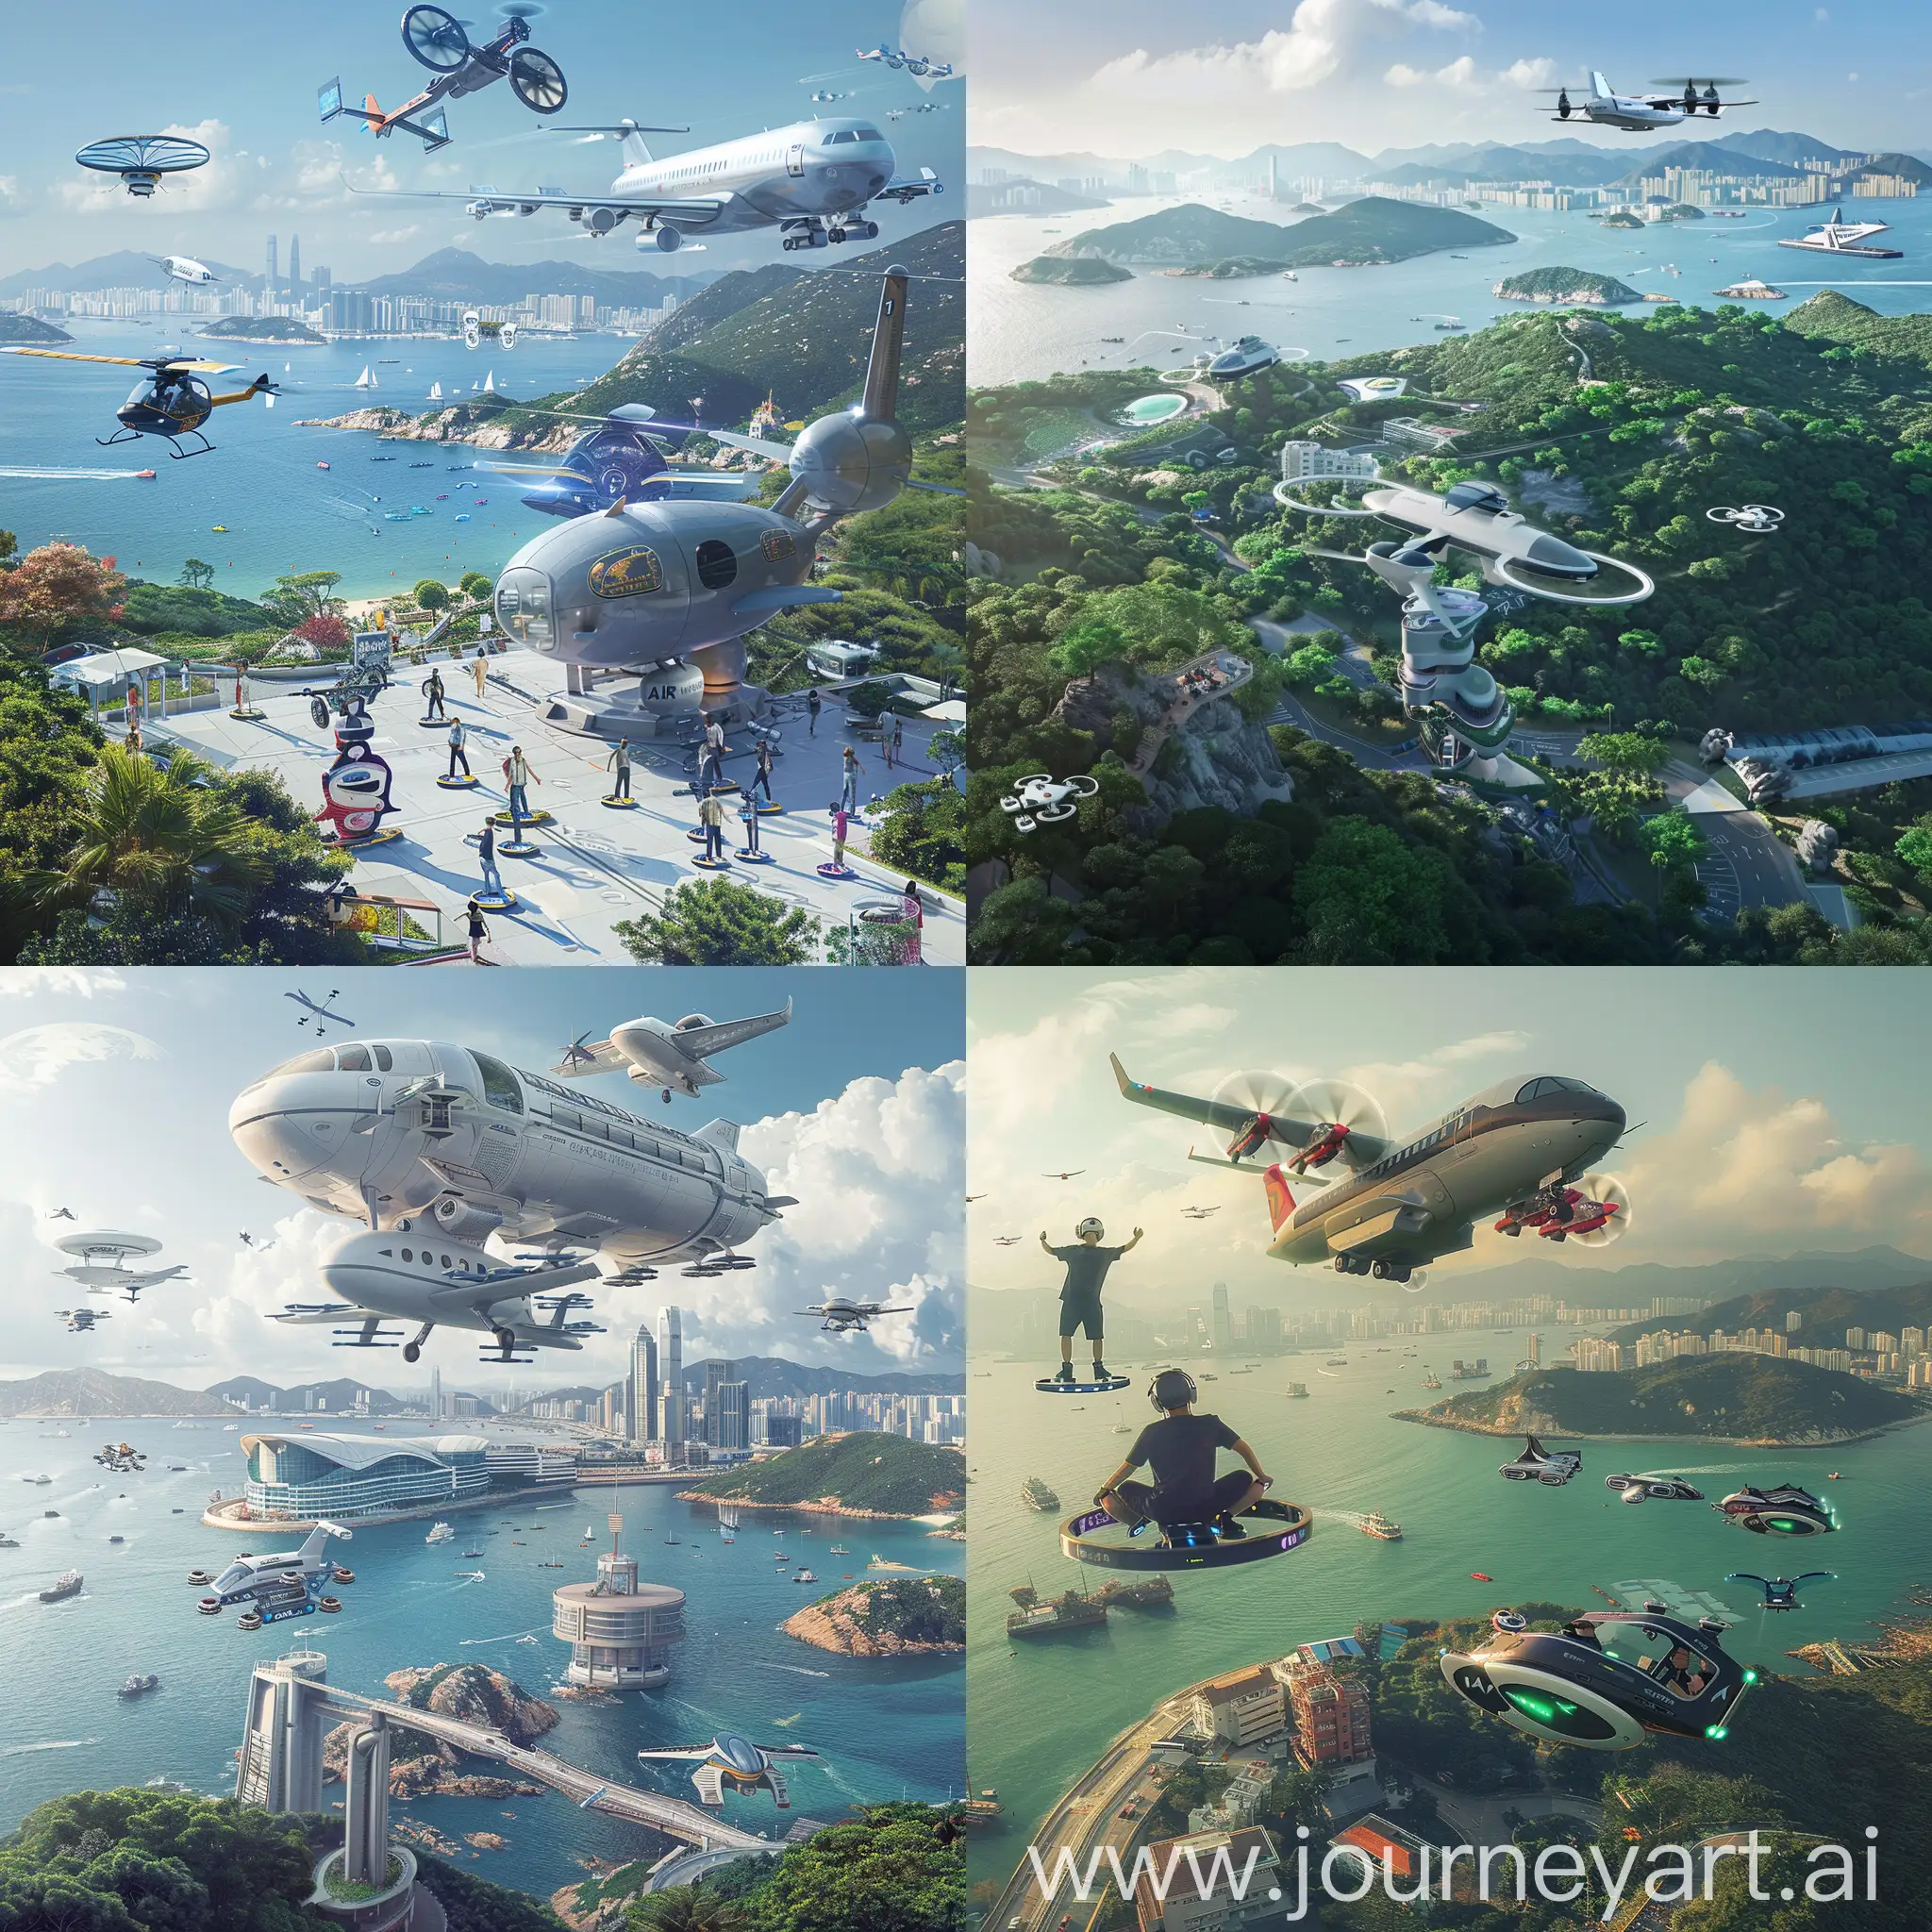 Hong Kong's Cheung Chau Island in 2050 has built a low-altitude transportation system with hoverboards, air taxis and large Airbus, but also retains an aerial view of the bay